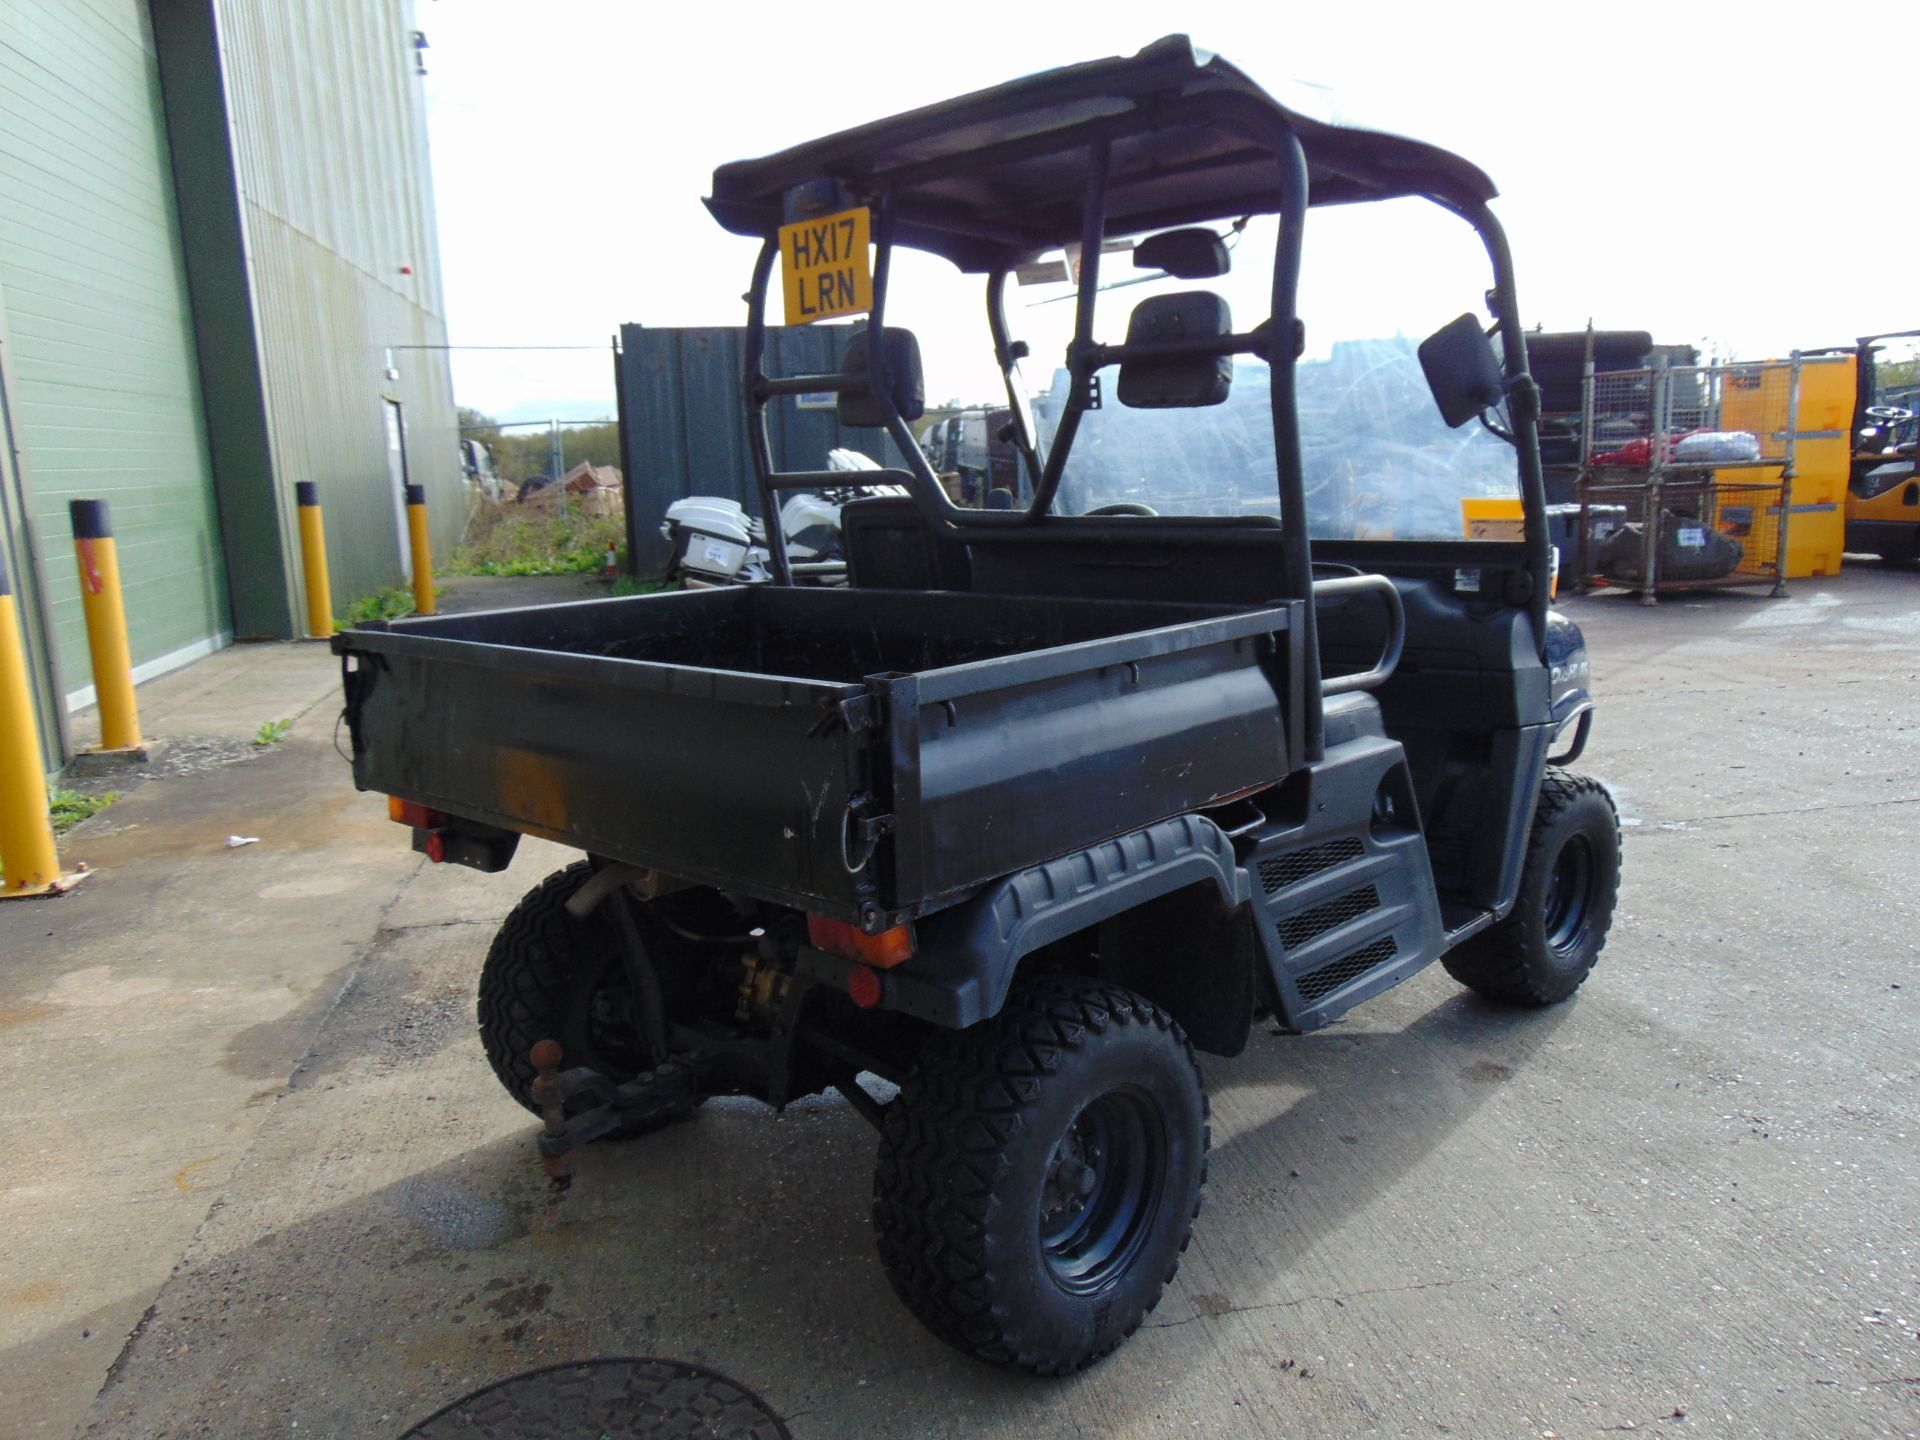 2017 Cushman XD1600 4x4 Diesel Utility Vehicle Showing 834 hrs - Image 8 of 20